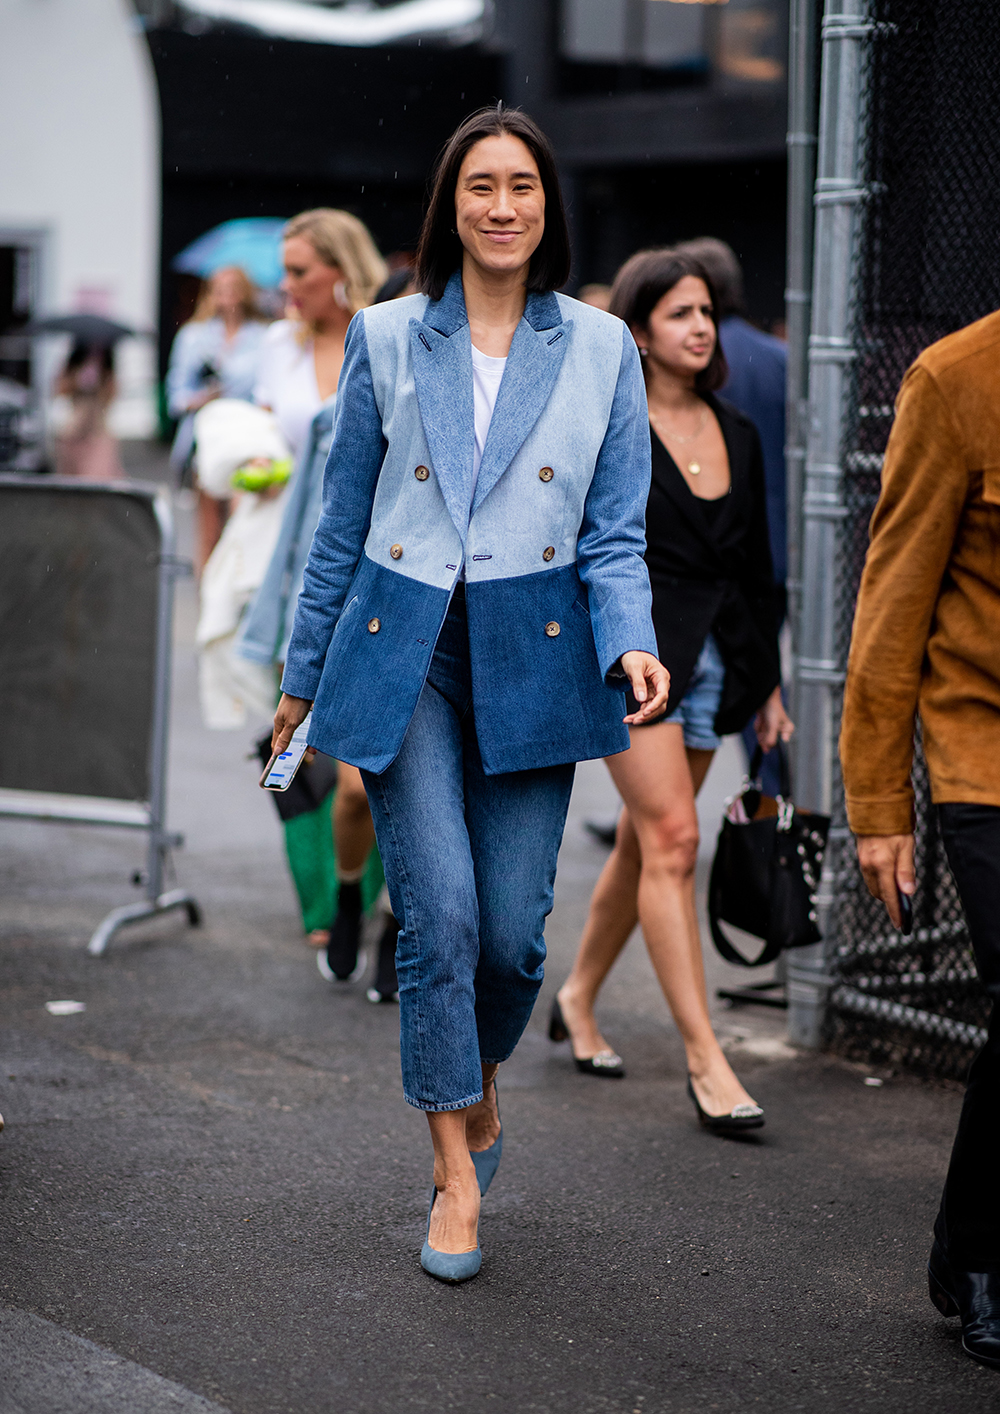 NEW YORK, NY - SEPTEMBER 08: Eva Chen wearing denim jeans and blazer seen outside Brandon Maxwell during New York Fashion Week Spring/Summer 2019 on September 8, 2018 in New York City. (Photo by Christian Vierig/Getty Images)